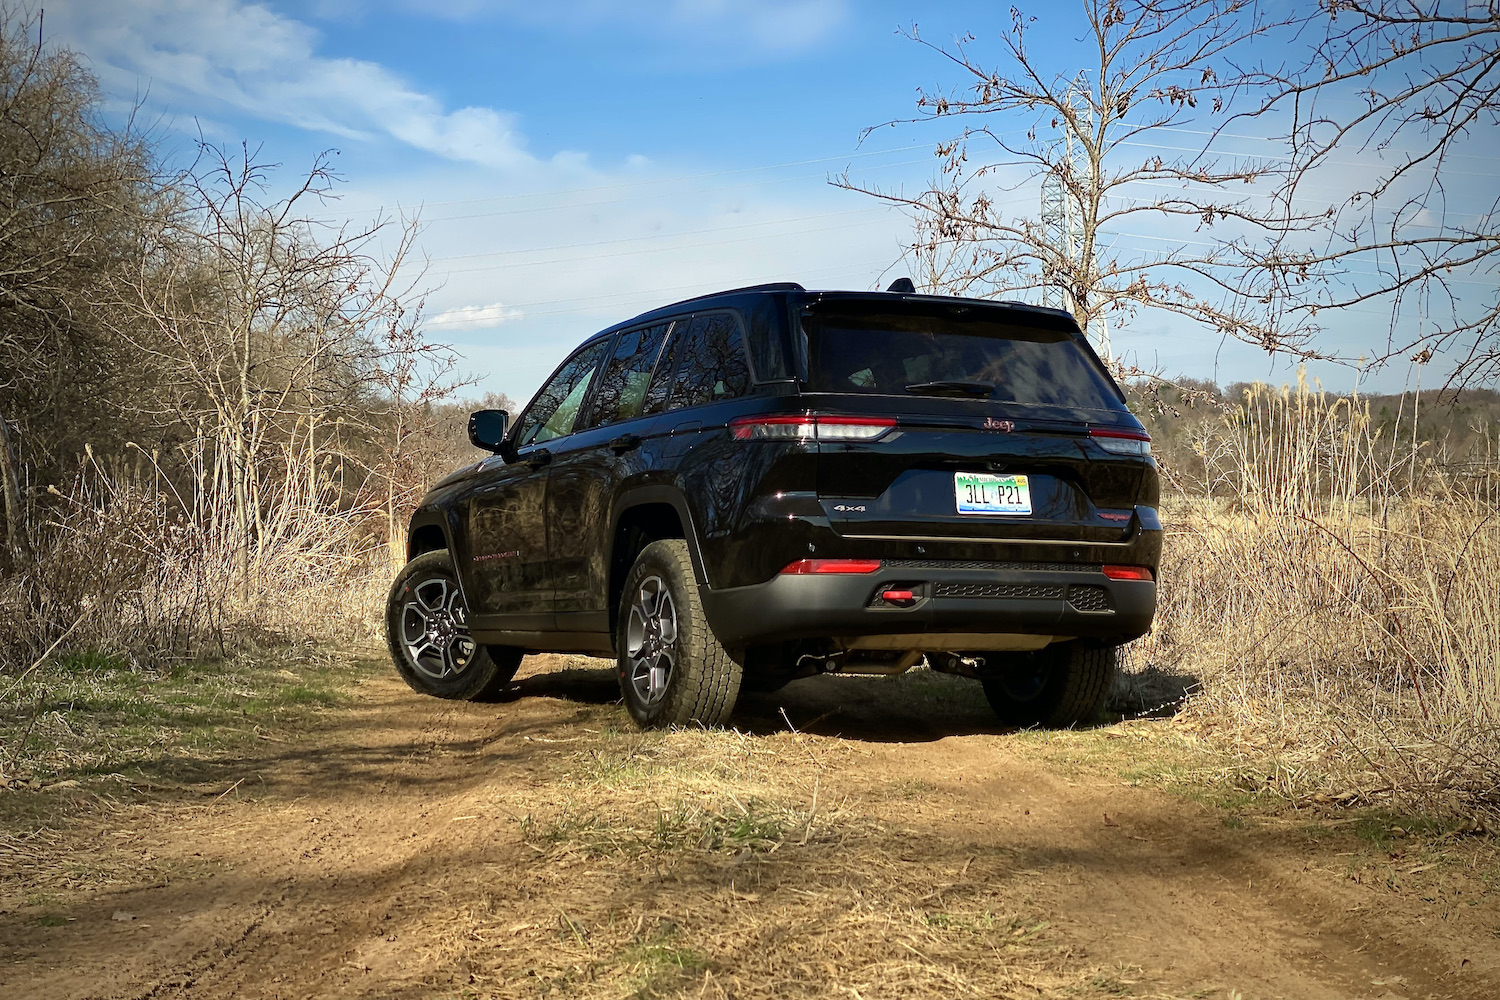 Rear end angle of2022 Jeep Grand Cherokee Trailhawk from driver's side on a dirt trail.